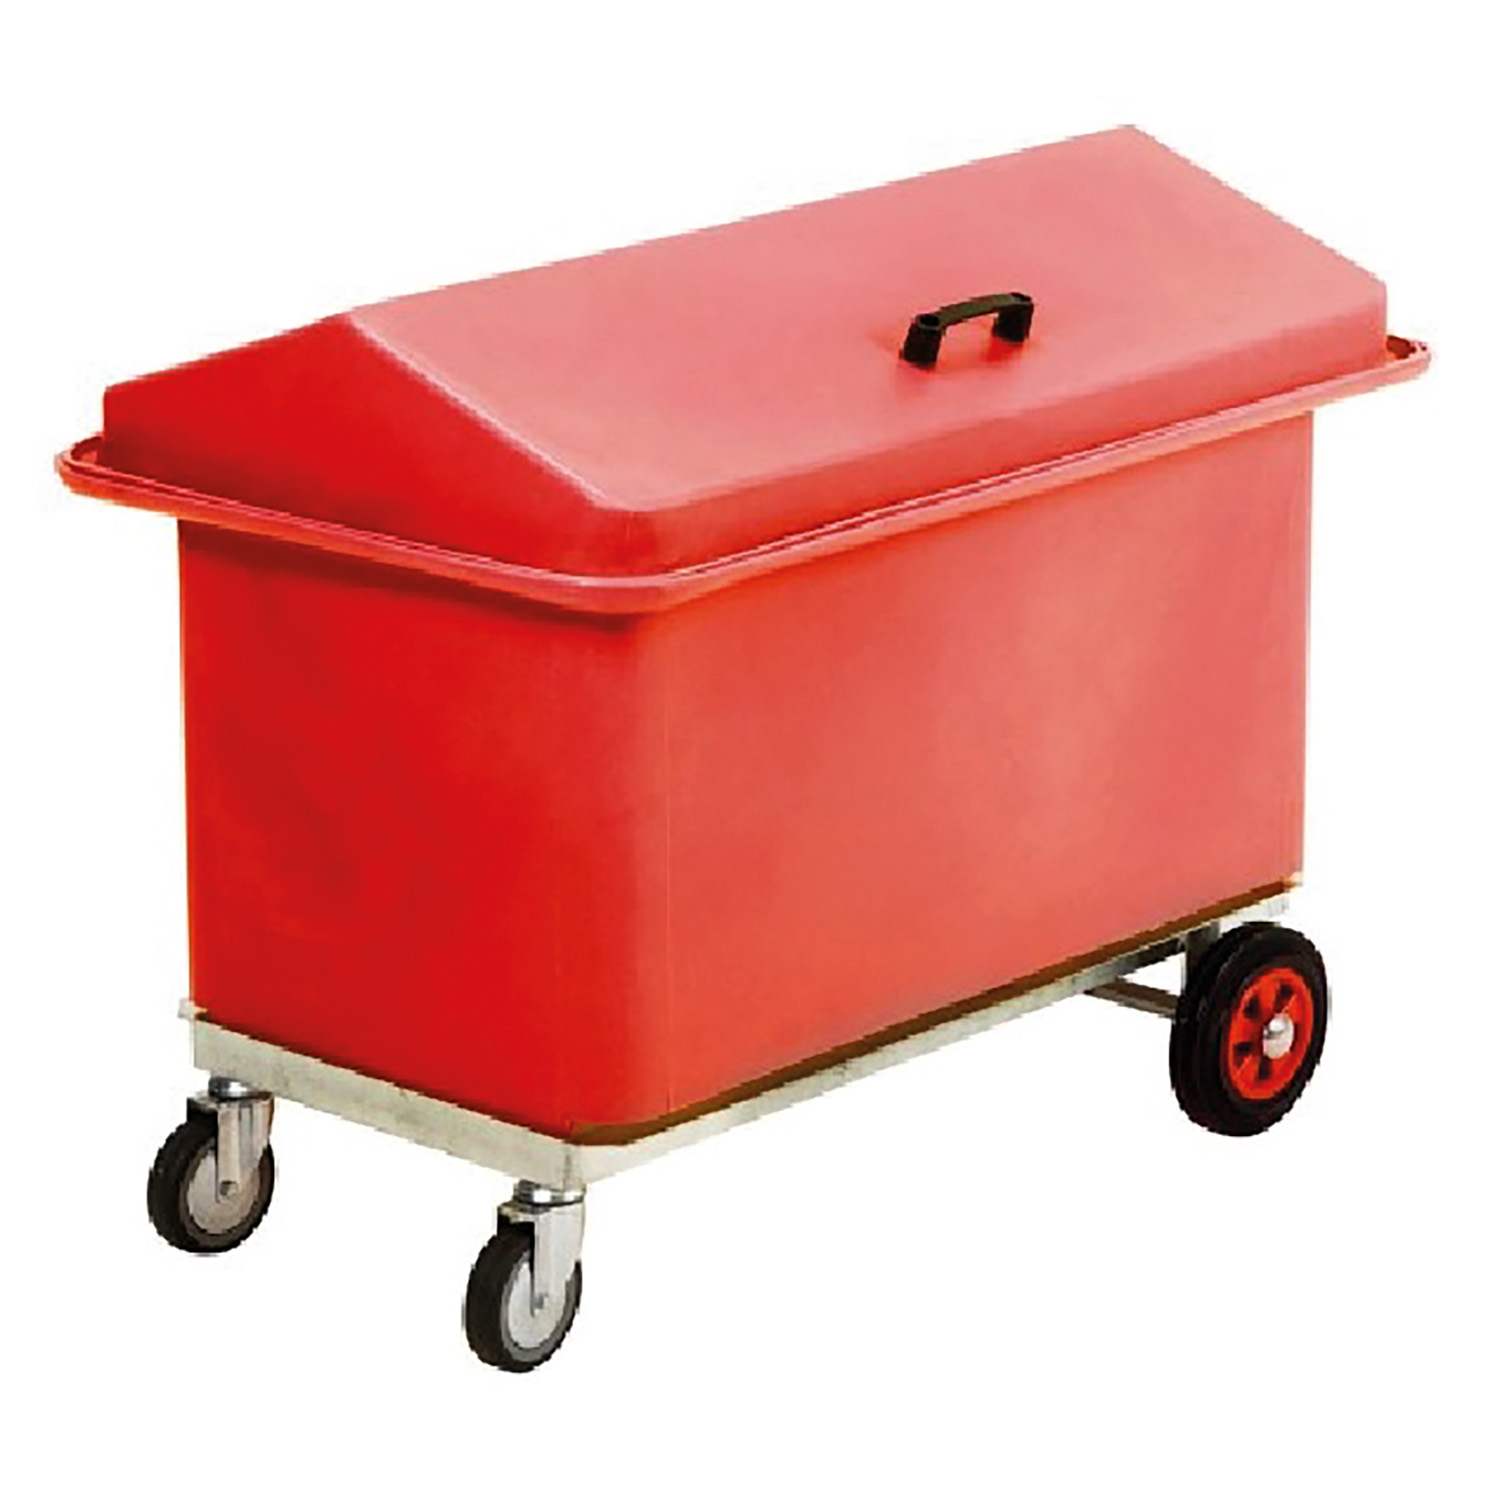 STUBBS MOBILE CHEST TWO COMPARTMENTS S58425 RED TWO COMPARTMENT MOBILE